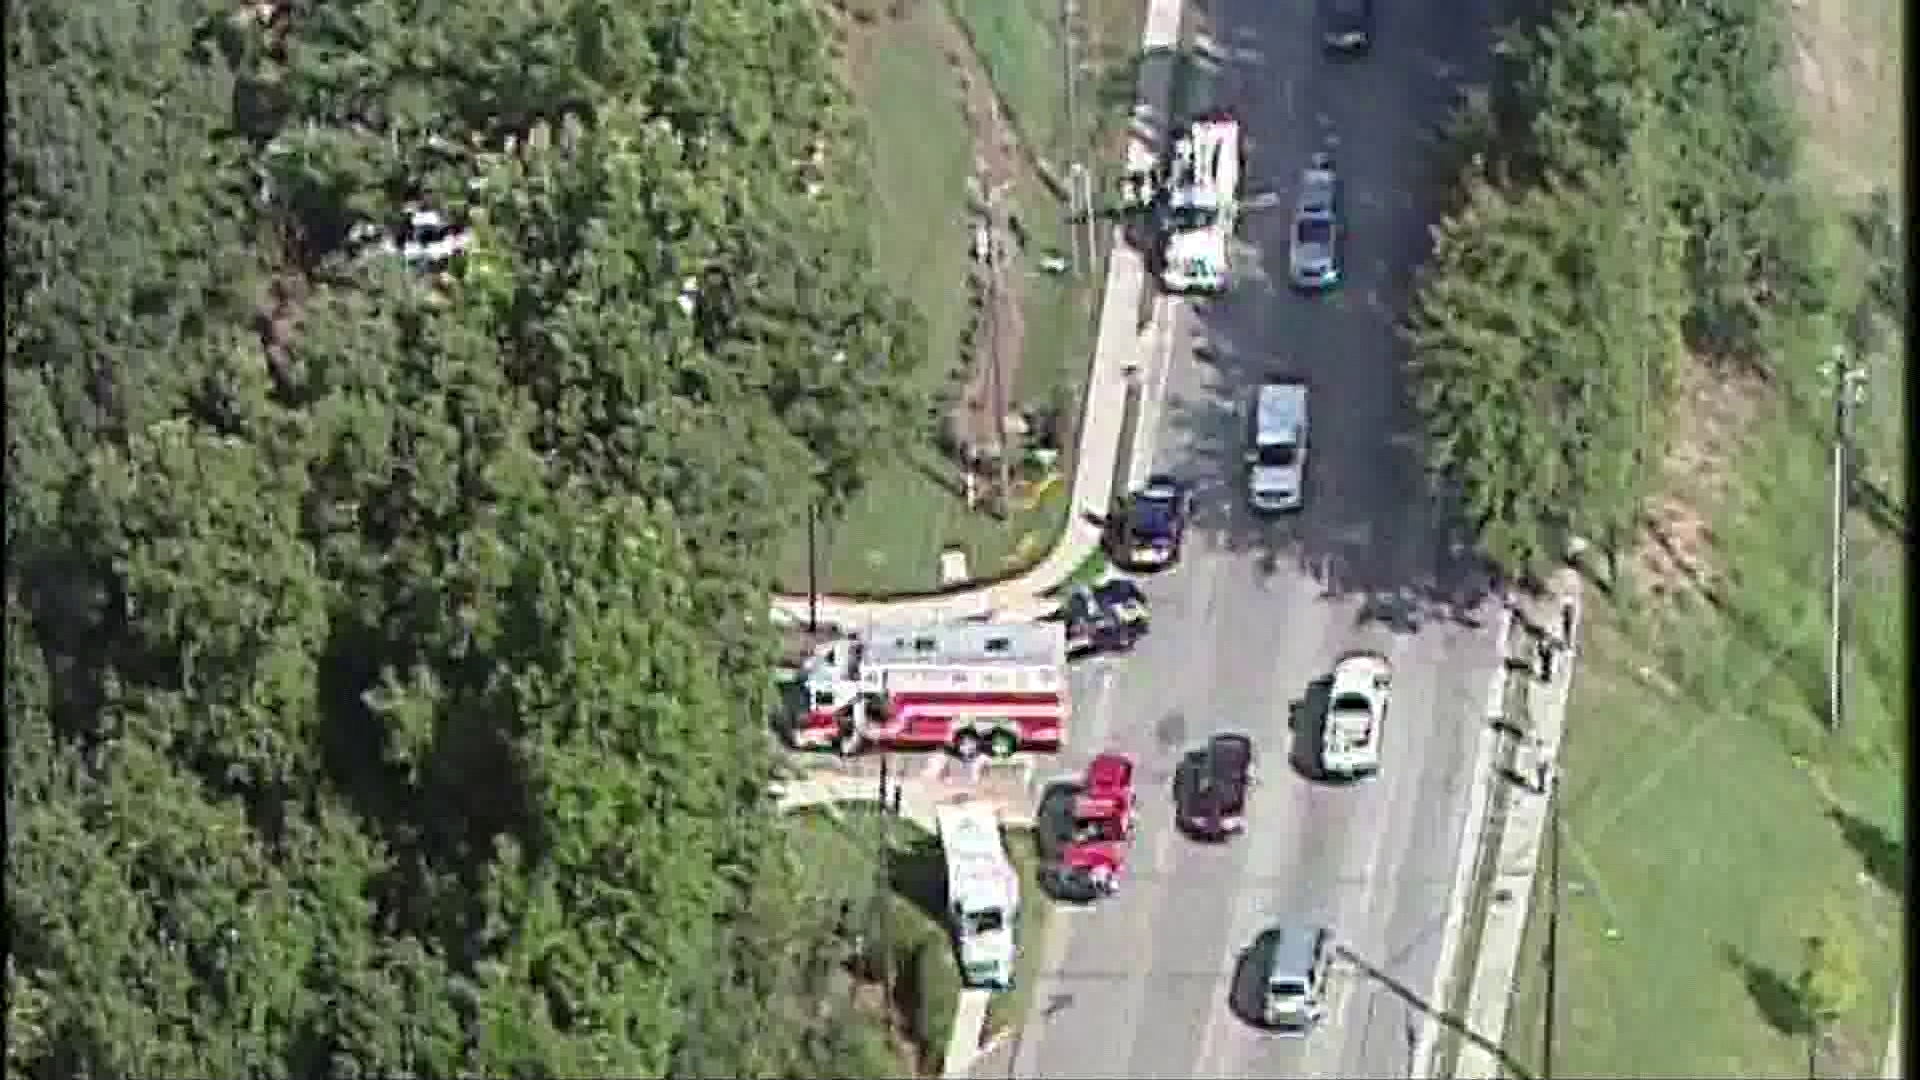 Officials say one person has died after an accident involving a truck in northwest Atlanta.